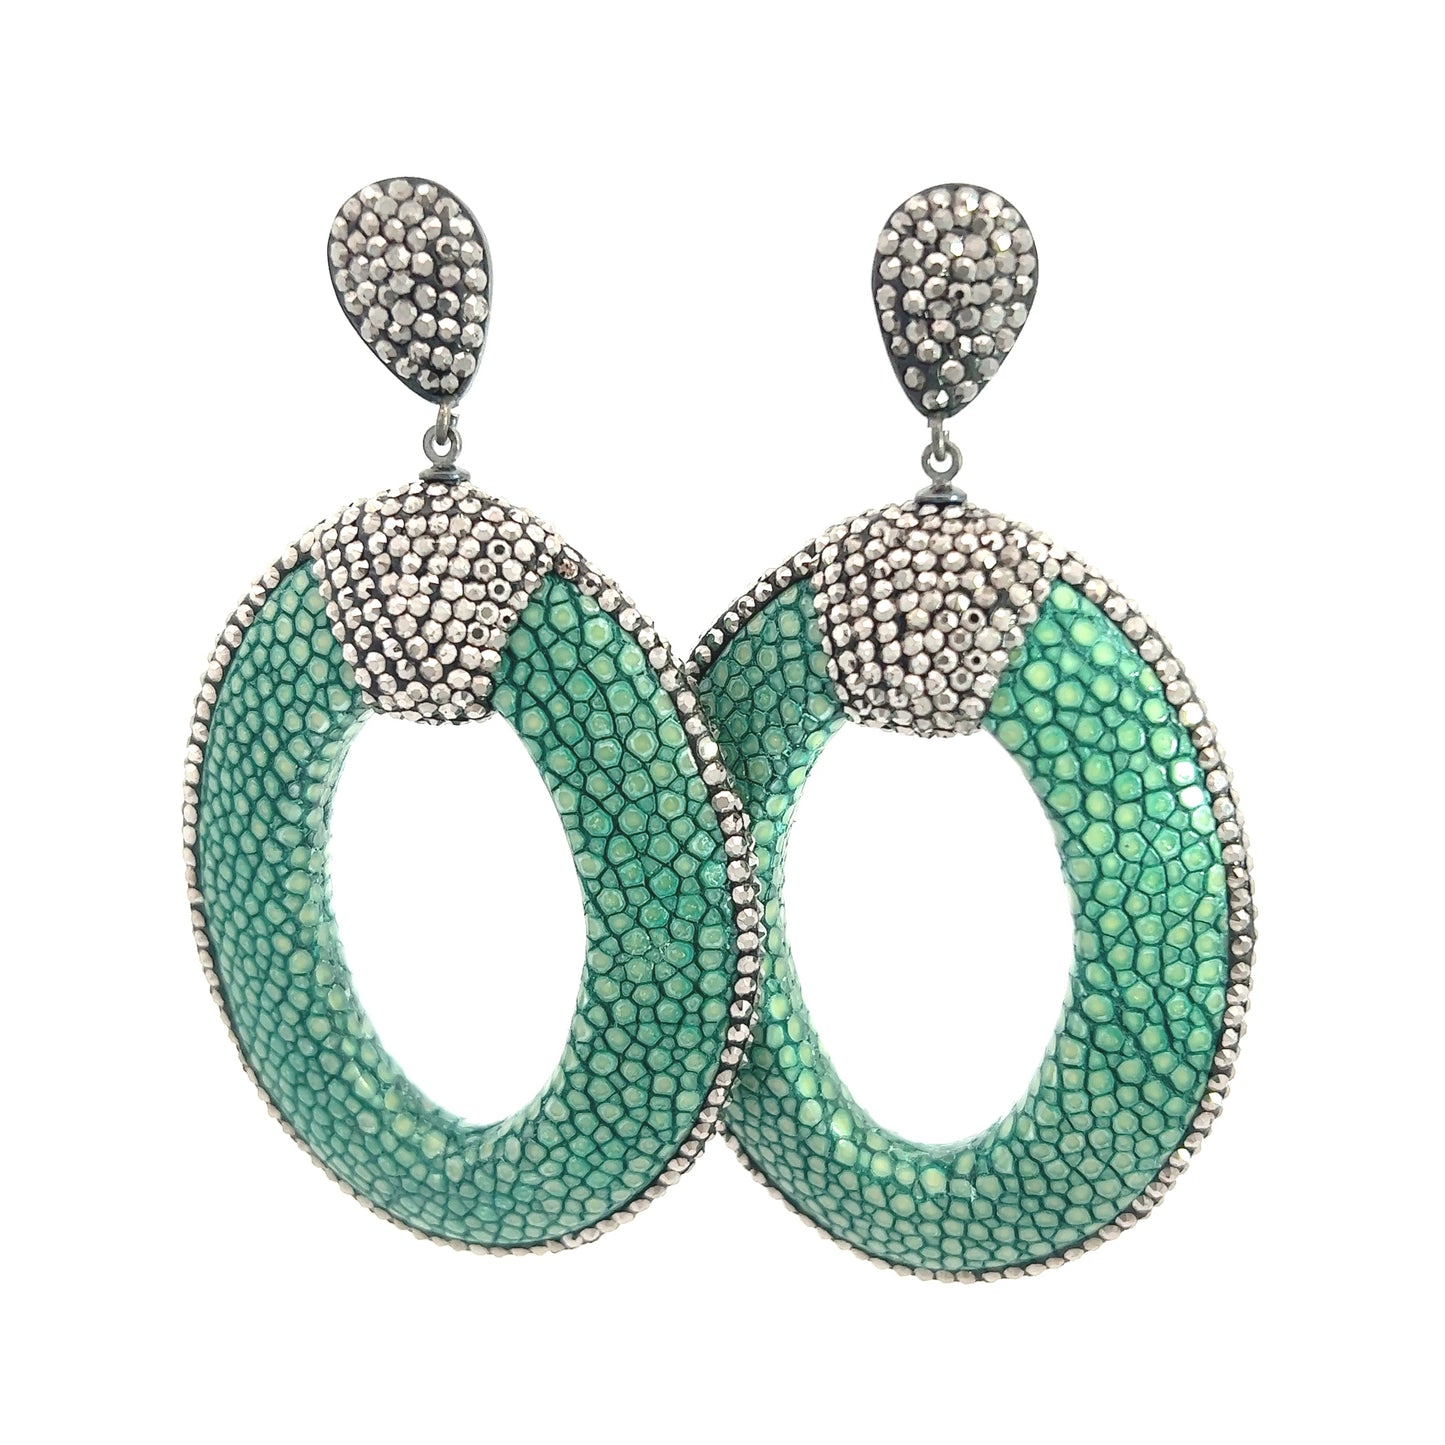 Green Shagreen Crystal Sterling Silver Earrings - Born To Glam